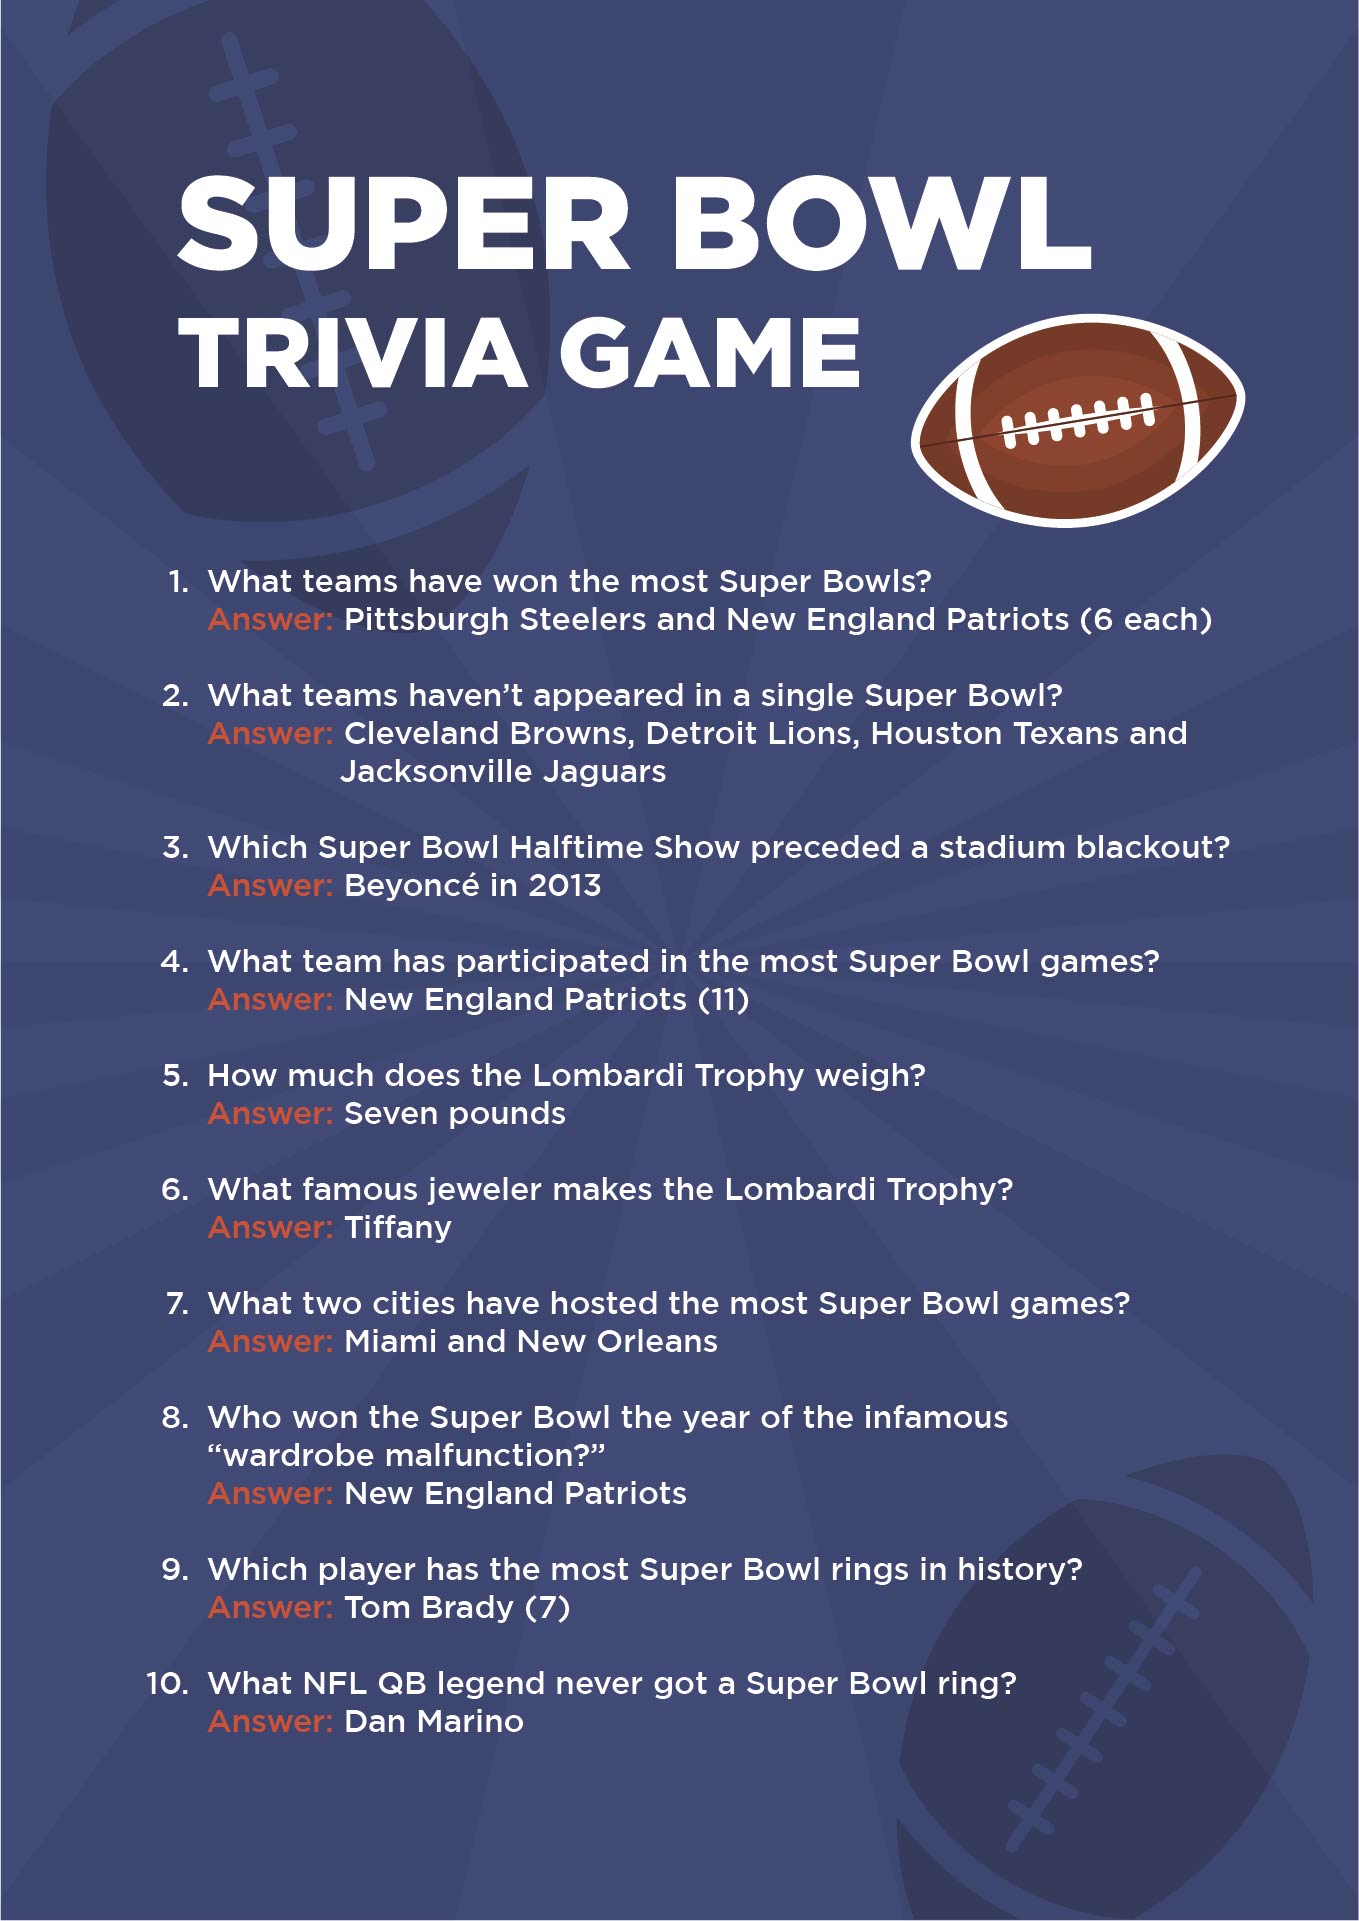 Super Bowl Trivia Questions and Answers